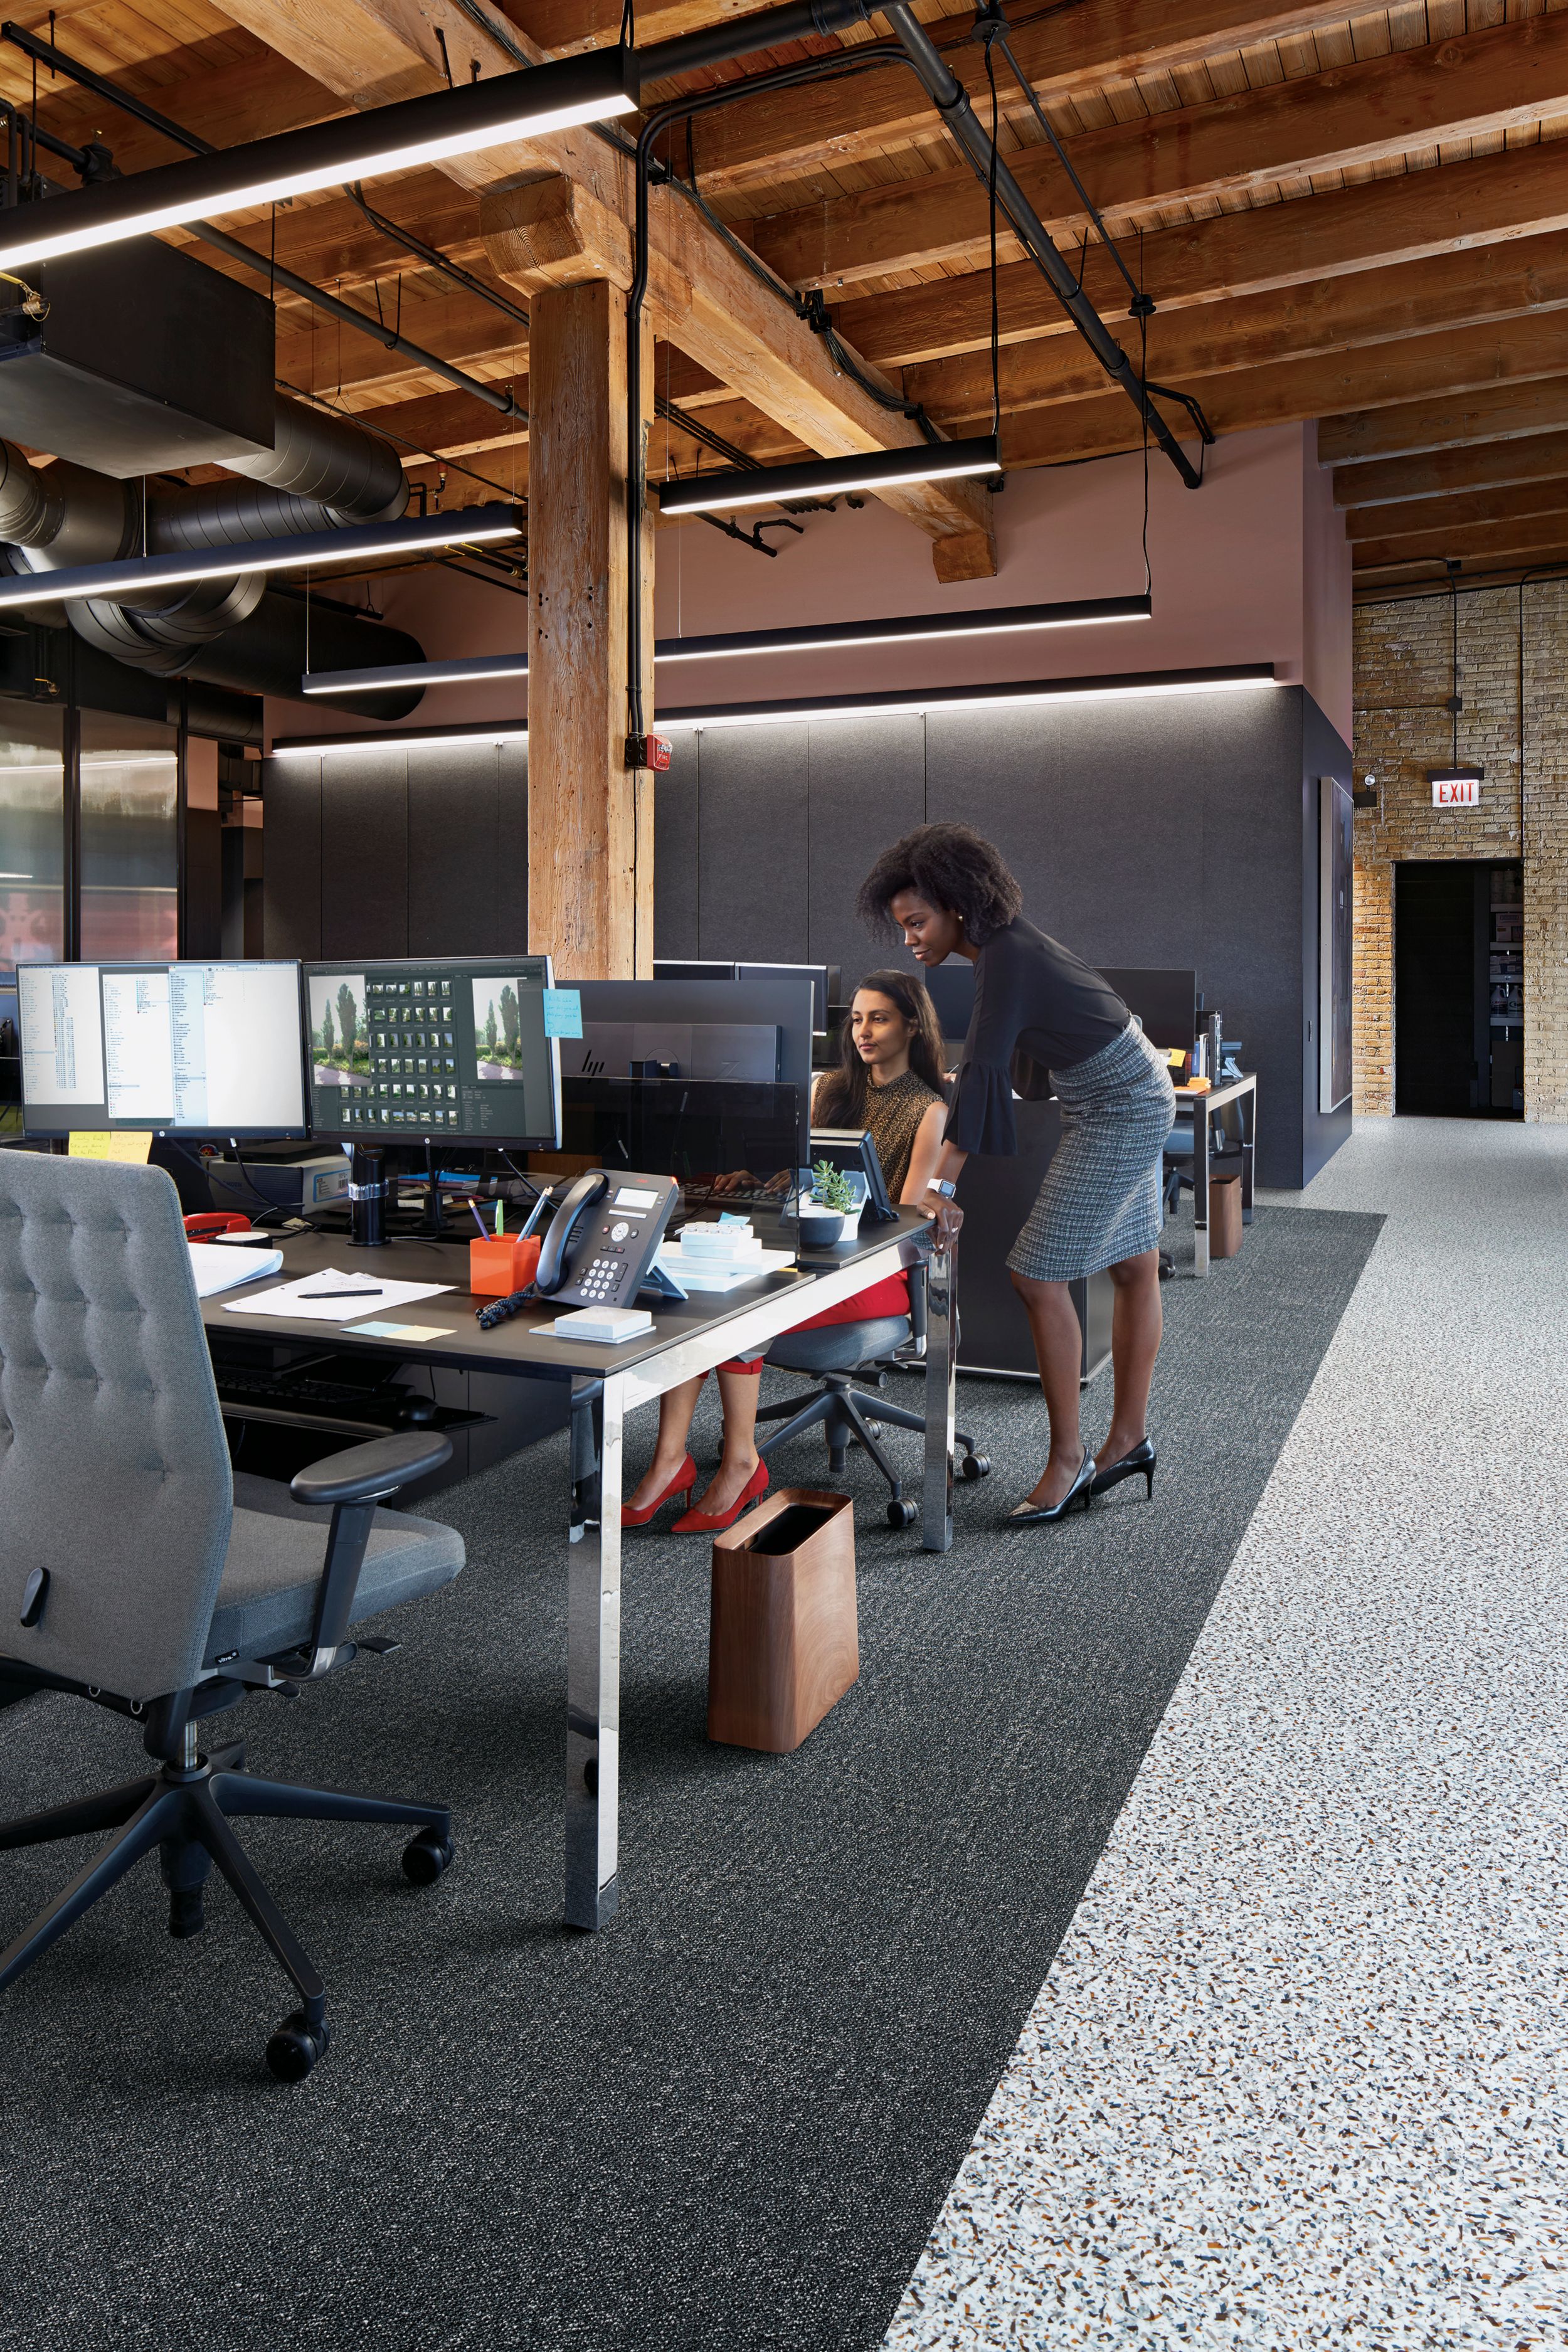 Interface Step it Up and Walk on By carpet tile in common work space with two people imagen número 4